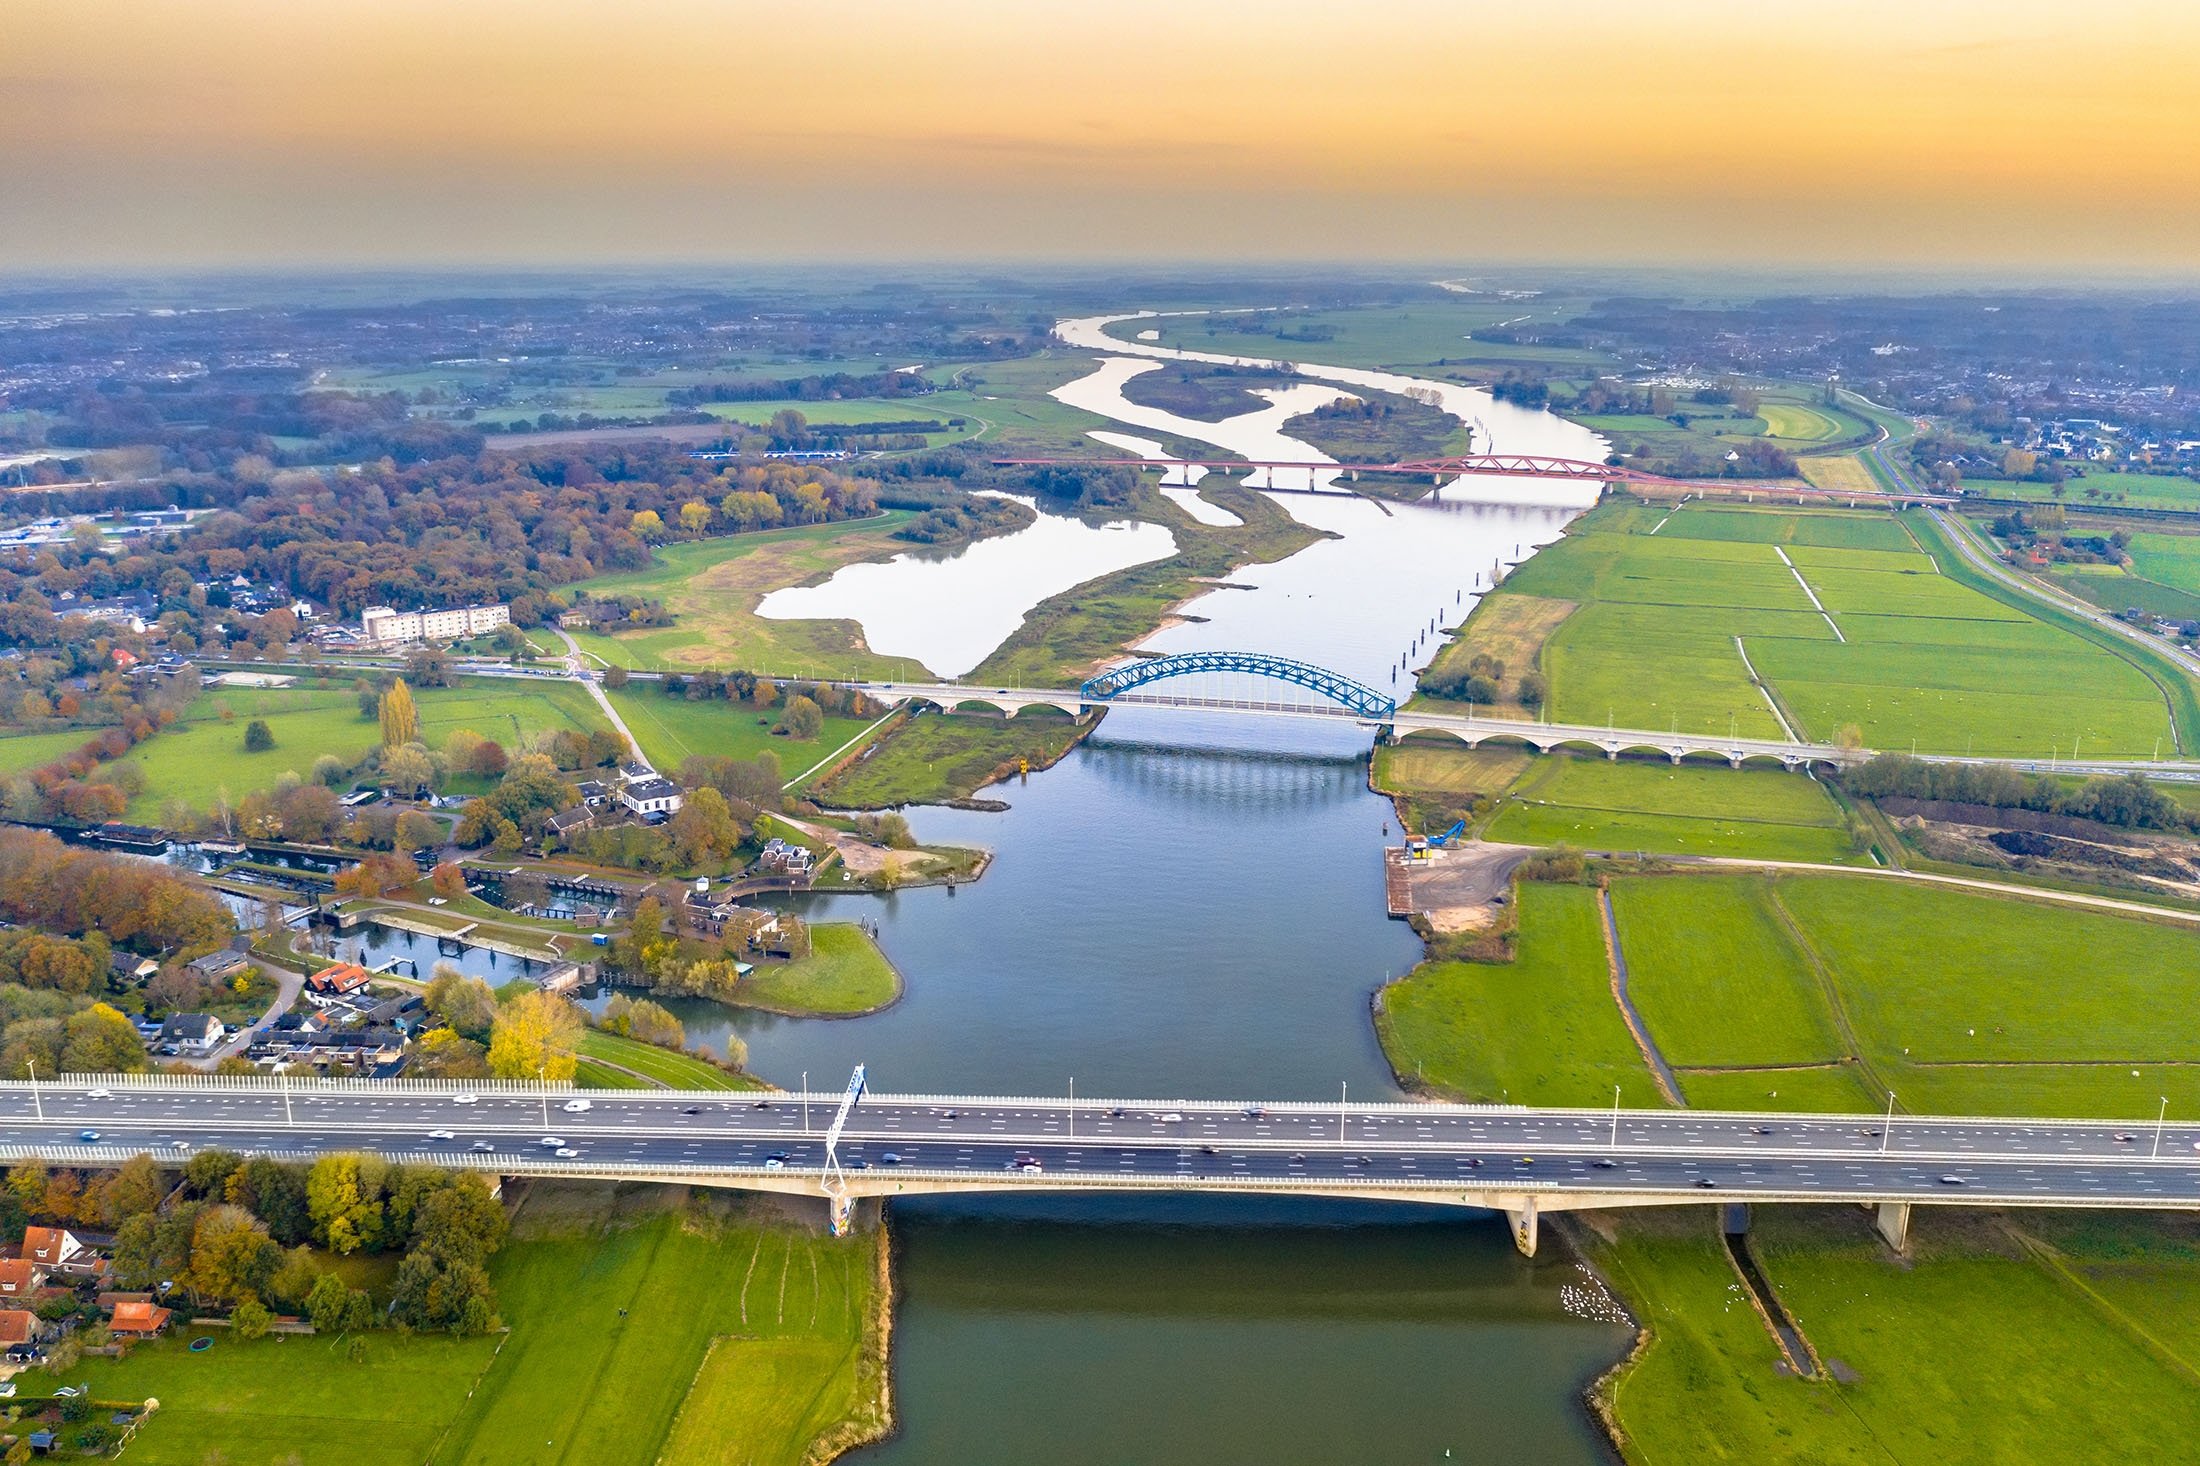 An aerial view of huge lowland river IJssel with highway and railroad bridges through sunset landscape, Zwolle, the Netherlands. (Shutterstock Photo)